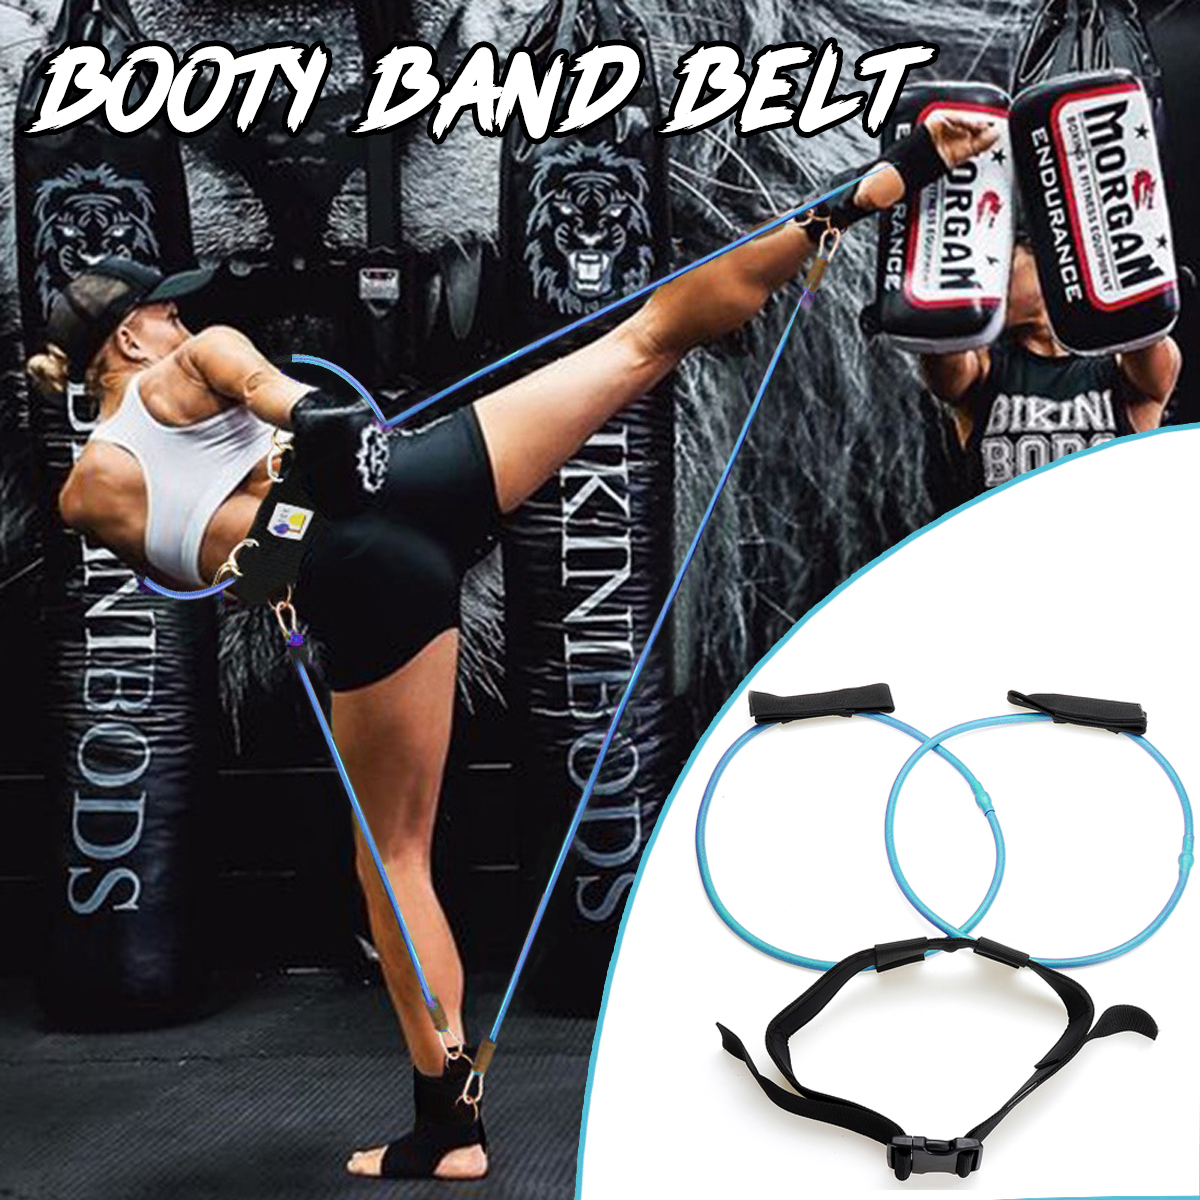 30LB-Booty-Resistance-Bands-Belt-Gym-Exercise-Training-Yoga-Butt-Lift-Fitness-Health-Workout-Band-1372253